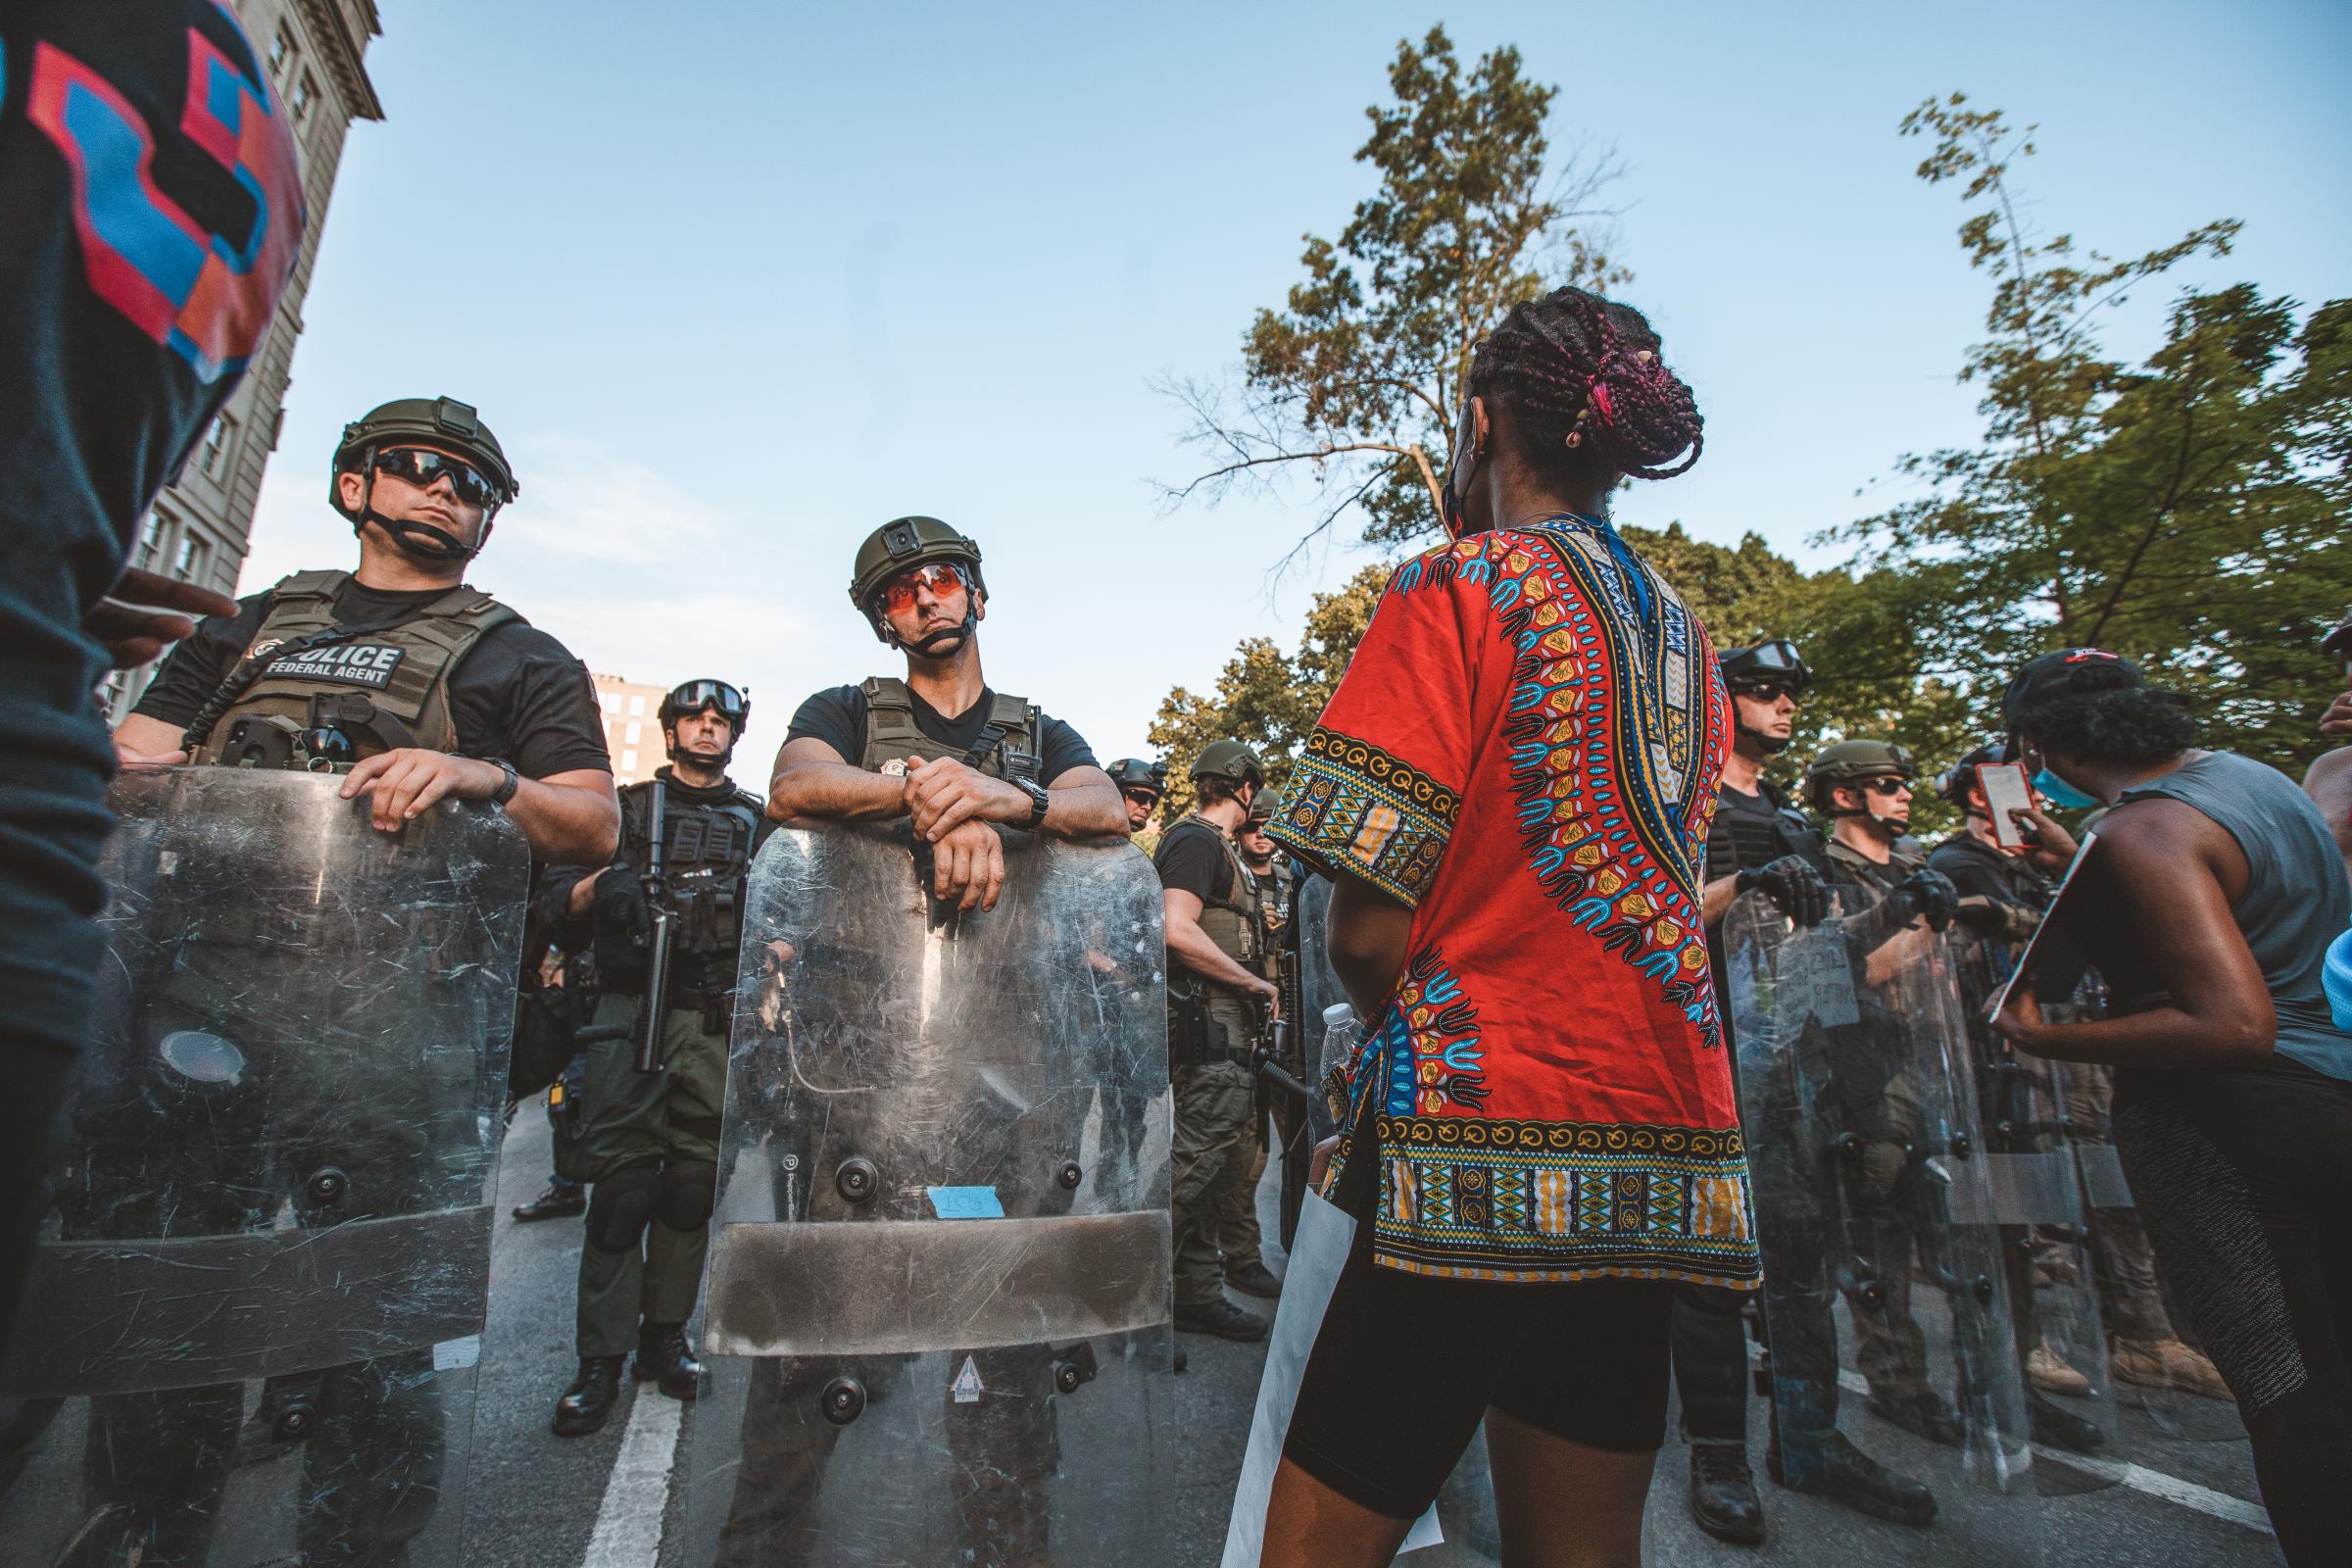 WASHINGTON D.C., Demonstrators and police face off on the sixth consecutive day of protests over...